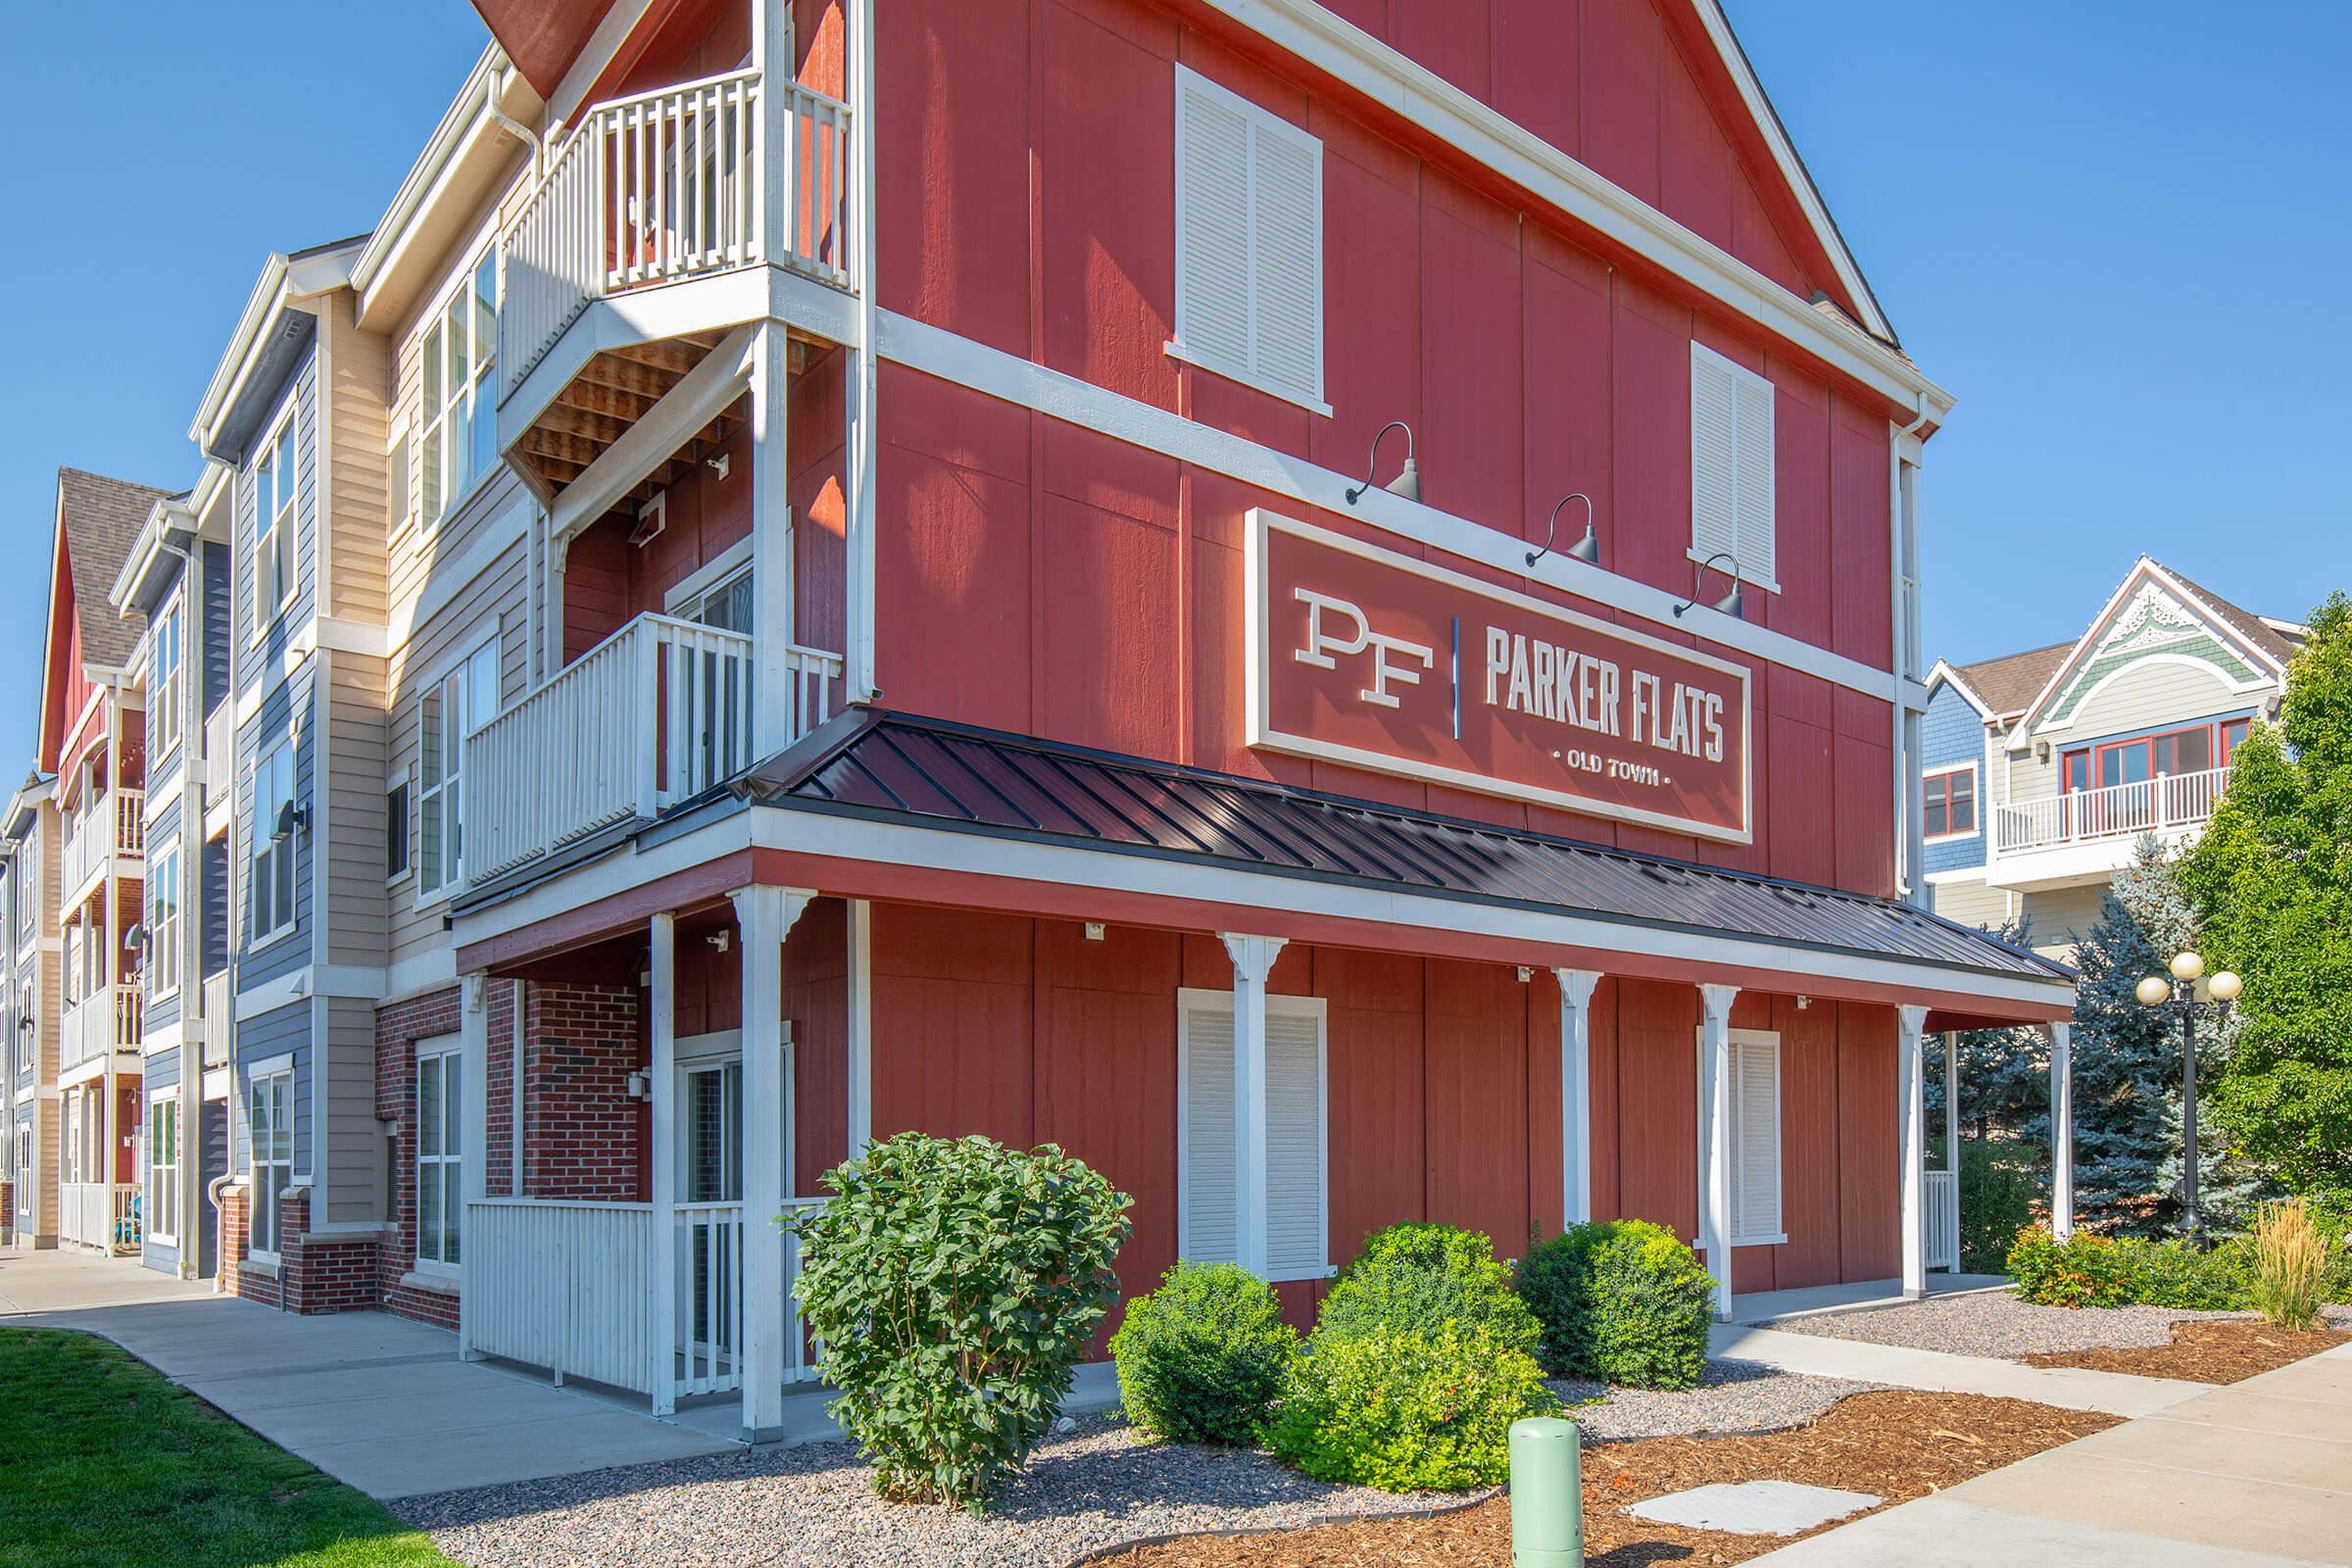 PARKER, CO APARTMENTS FOR RENT AT PARKER FLATS OLD TOWN